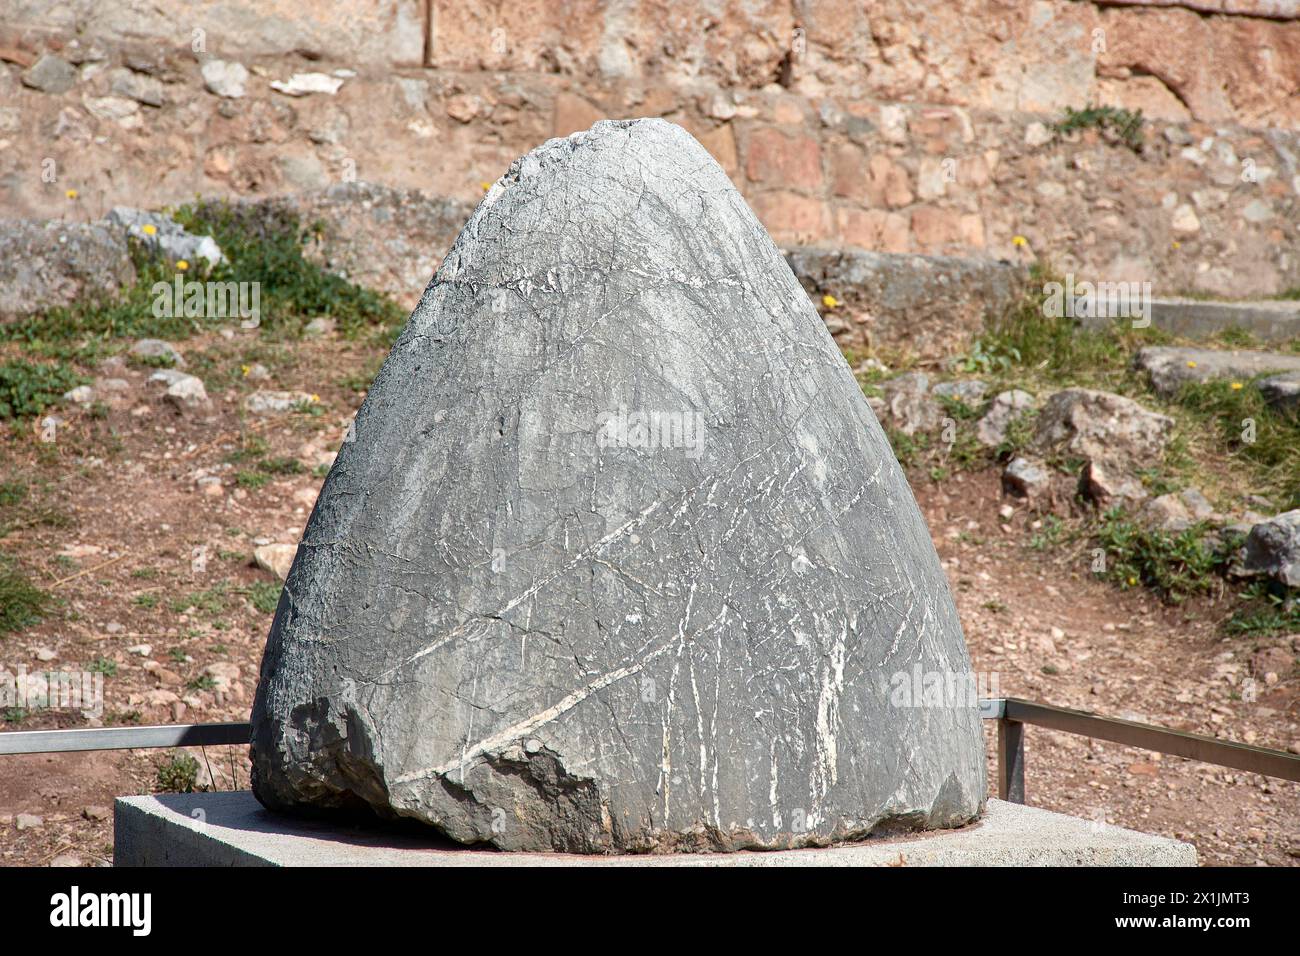 Delphi Omphalos This omphalos stands on the original site of the ancient omphalos which was anciently supposed to mark the navel of the world. The ori Stock Photo